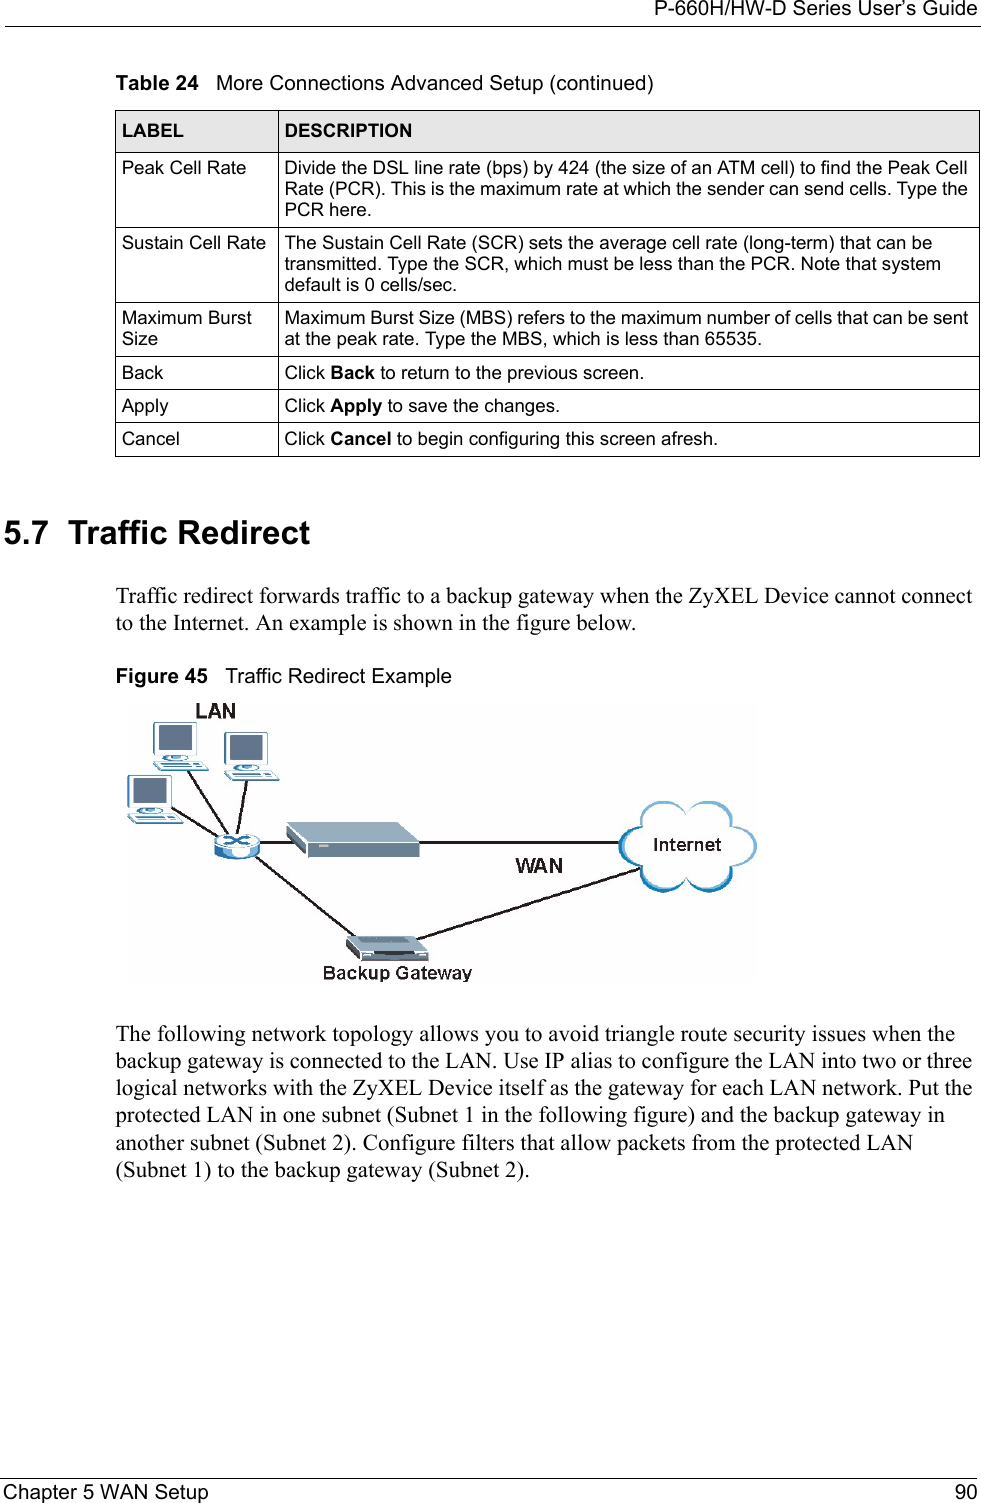 P-660H/HW-D Series User’s GuideChapter 5 WAN Setup 905.7  Traffic Redirect  Traffic redirect forwards traffic to a backup gateway when the ZyXEL Device cannot connect to the Internet. An example is shown in the figure below.Figure 45   Traffic Redirect ExampleThe following network topology allows you to avoid triangle route security issues when the backup gateway is connected to the LAN. Use IP alias to configure the LAN into two or three logical networks with the ZyXEL Device itself as the gateway for each LAN network. Put the protected LAN in one subnet (Subnet 1 in the following figure) and the backup gateway in another subnet (Subnet 2). Configure filters that allow packets from the protected LAN (Subnet 1) to the backup gateway (Subnet 2). Peak Cell Rate Divide the DSL line rate (bps) by 424 (the size of an ATM cell) to find the Peak Cell Rate (PCR). This is the maximum rate at which the sender can send cells. Type the PCR here.Sustain Cell Rate The Sustain Cell Rate (SCR) sets the average cell rate (long-term) that can be transmitted. Type the SCR, which must be less than the PCR. Note that system default is 0 cells/sec. Maximum Burst SizeMaximum Burst Size (MBS) refers to the maximum number of cells that can be sent at the peak rate. Type the MBS, which is less than 65535. Back Click Back to return to the previous screen.Apply Click Apply to save the changes. Cancel Click Cancel to begin configuring this screen afresh.Table 24   More Connections Advanced Setup (continued)LABEL DESCRIPTION